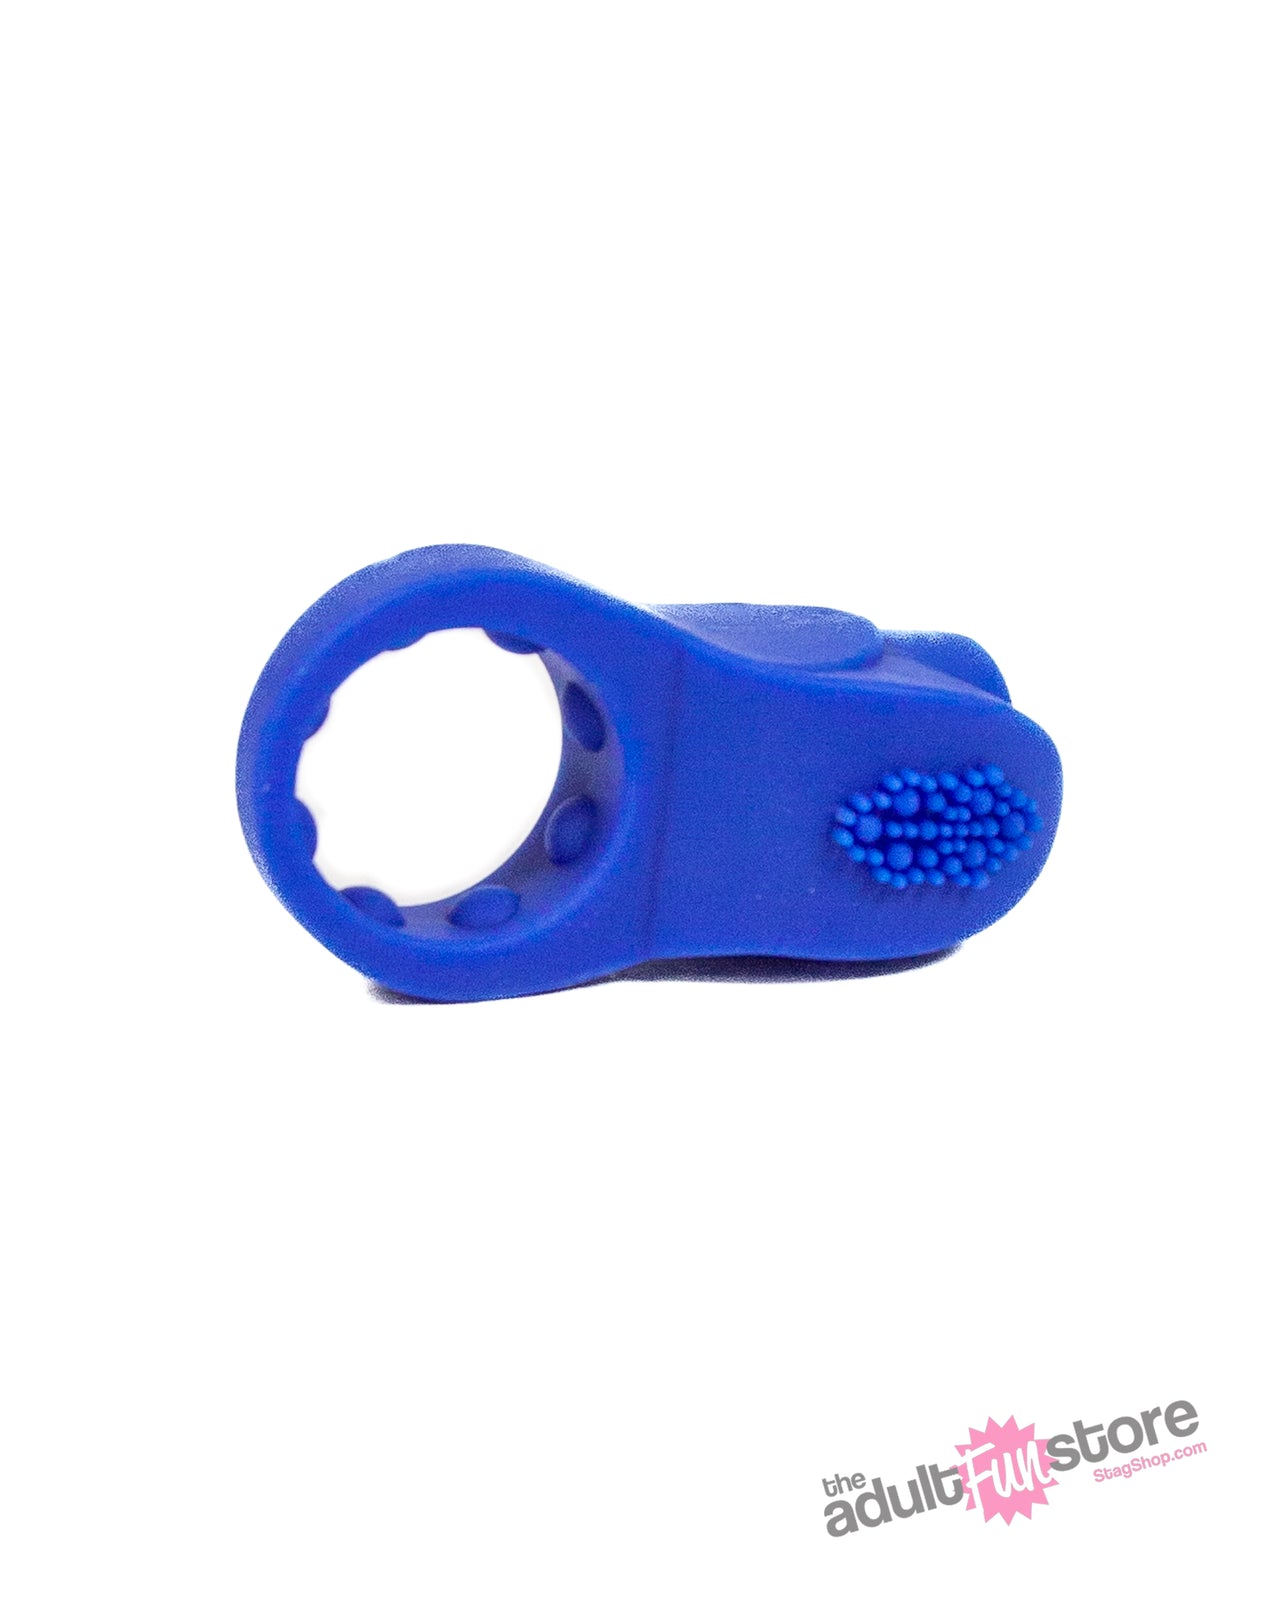 Screaming O - PrimO - Apex Vibrating Cock Ring - Blue - Stag Shop